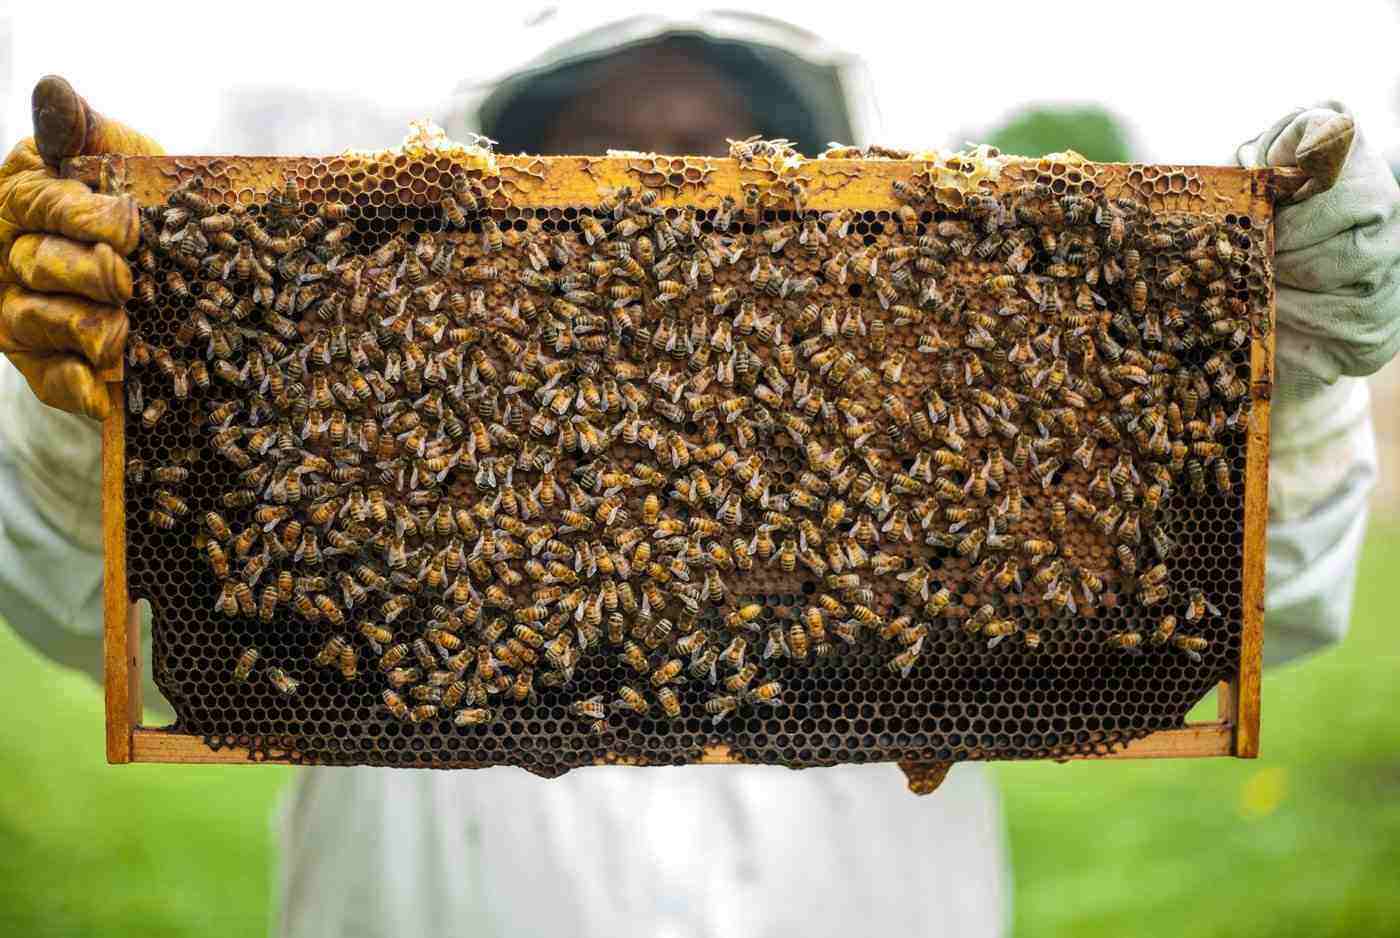 beekeeper and bees - the pros and cons of backyard beekeeping